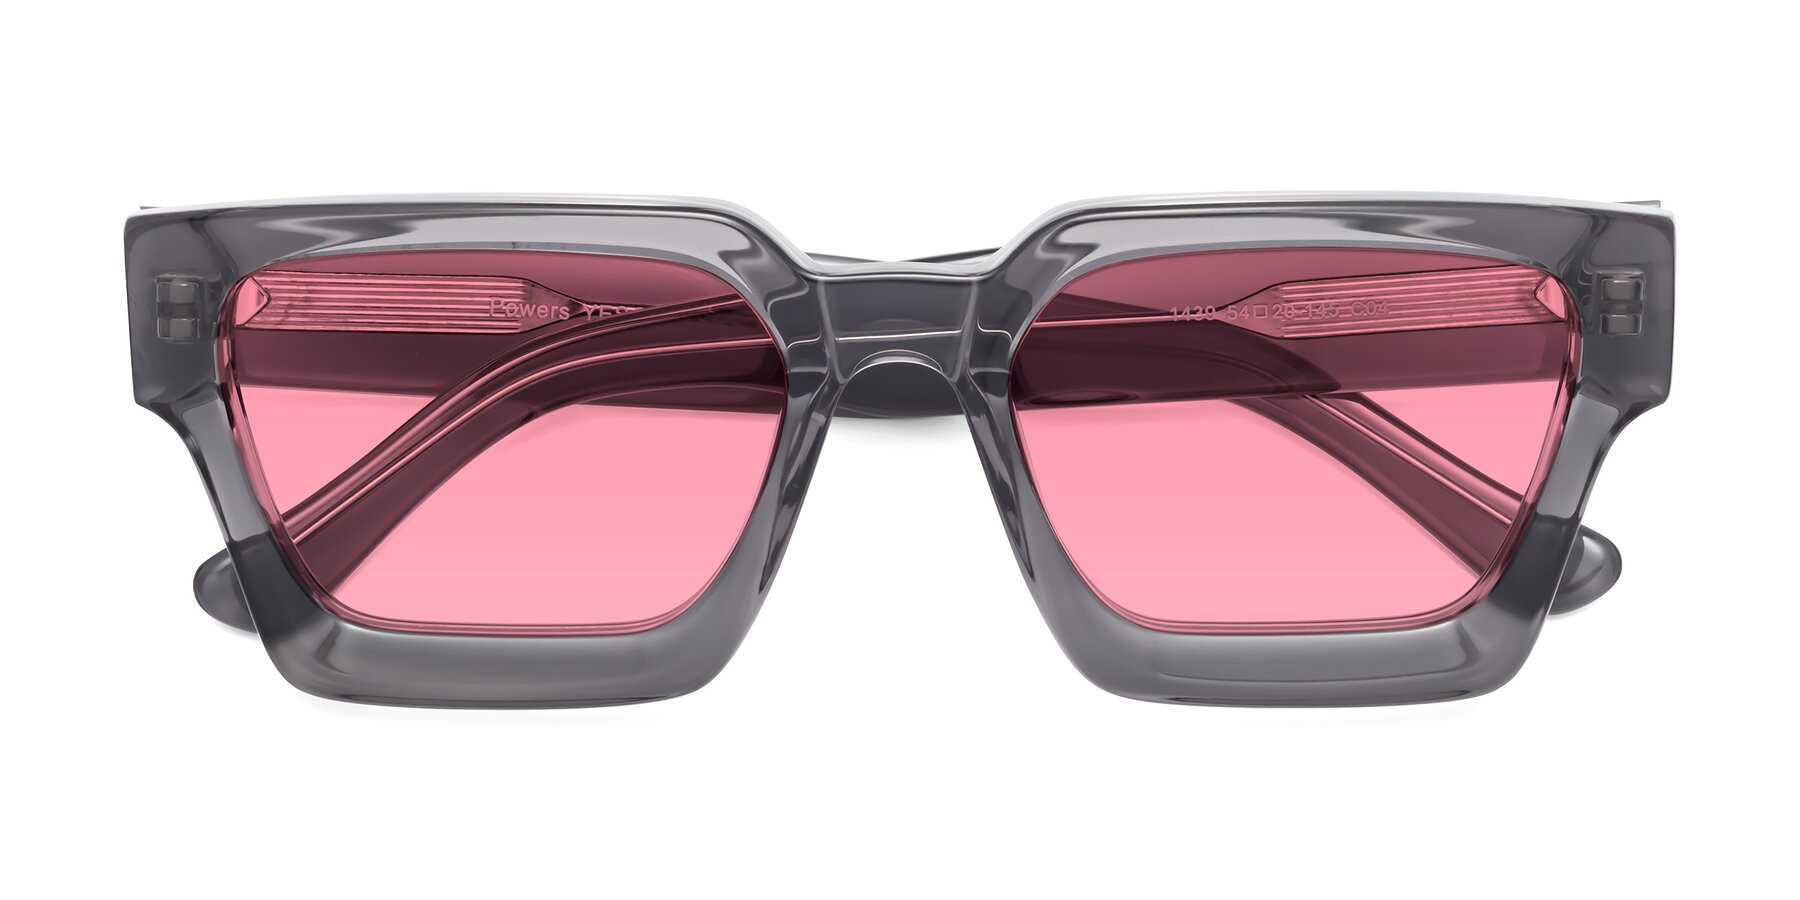 Translucent Gray Thick Geek-Chic Geometric Tinted Sunglasses with Pink Sunwear Lenses